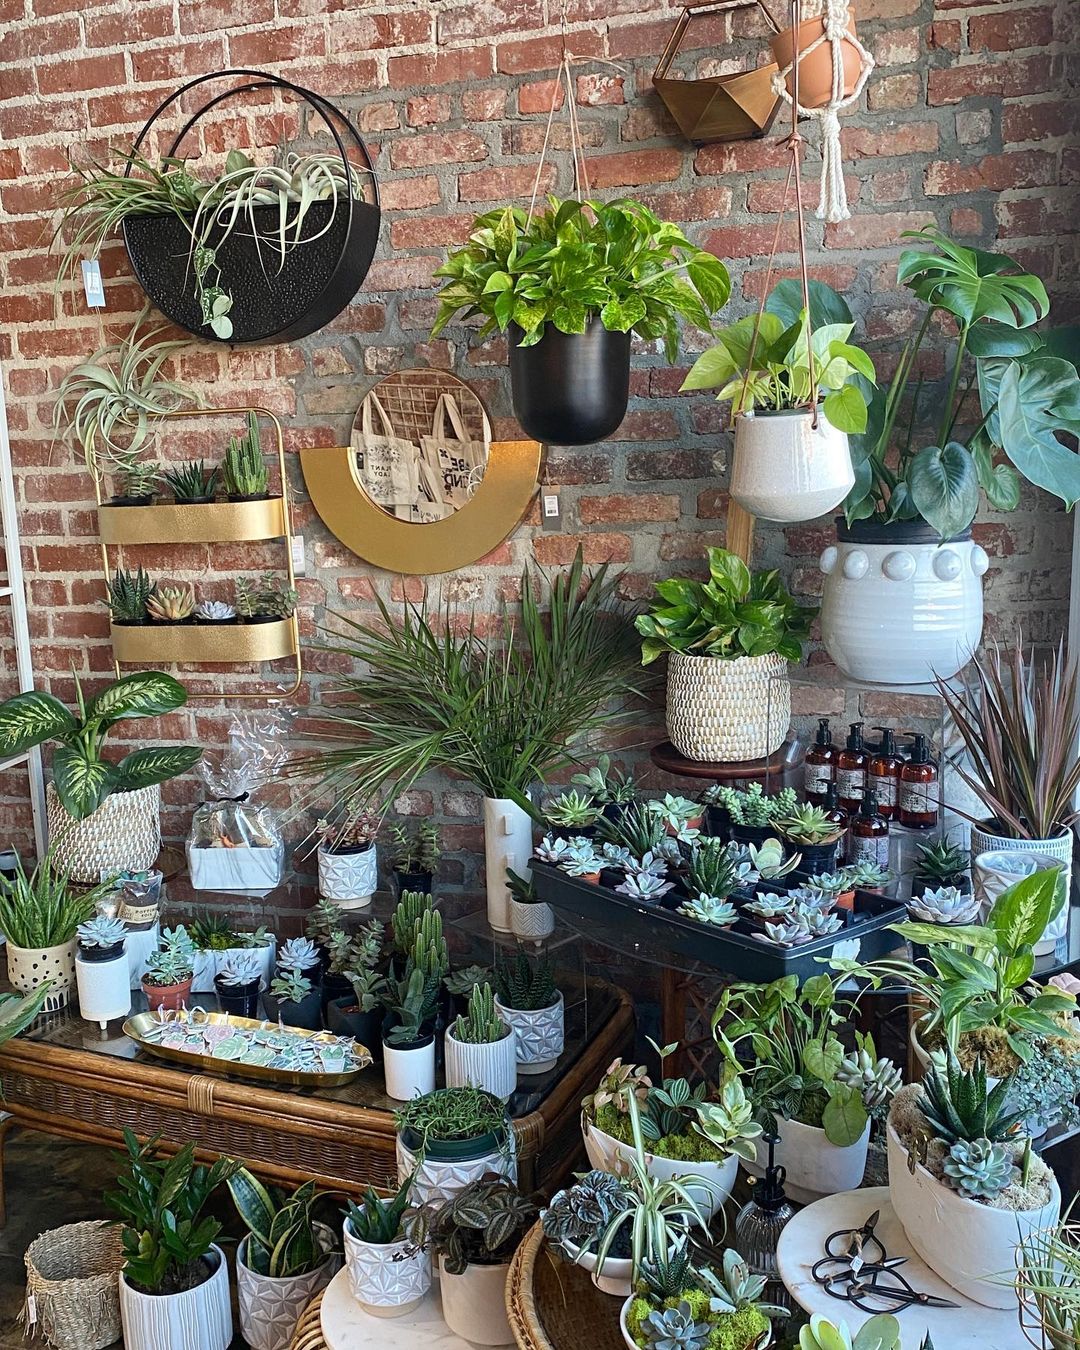 Vibrant interior of Everbloom Floral Studio & Shop located in Memphis, TN showcasing a variety of vases and green succulents in different sizes.